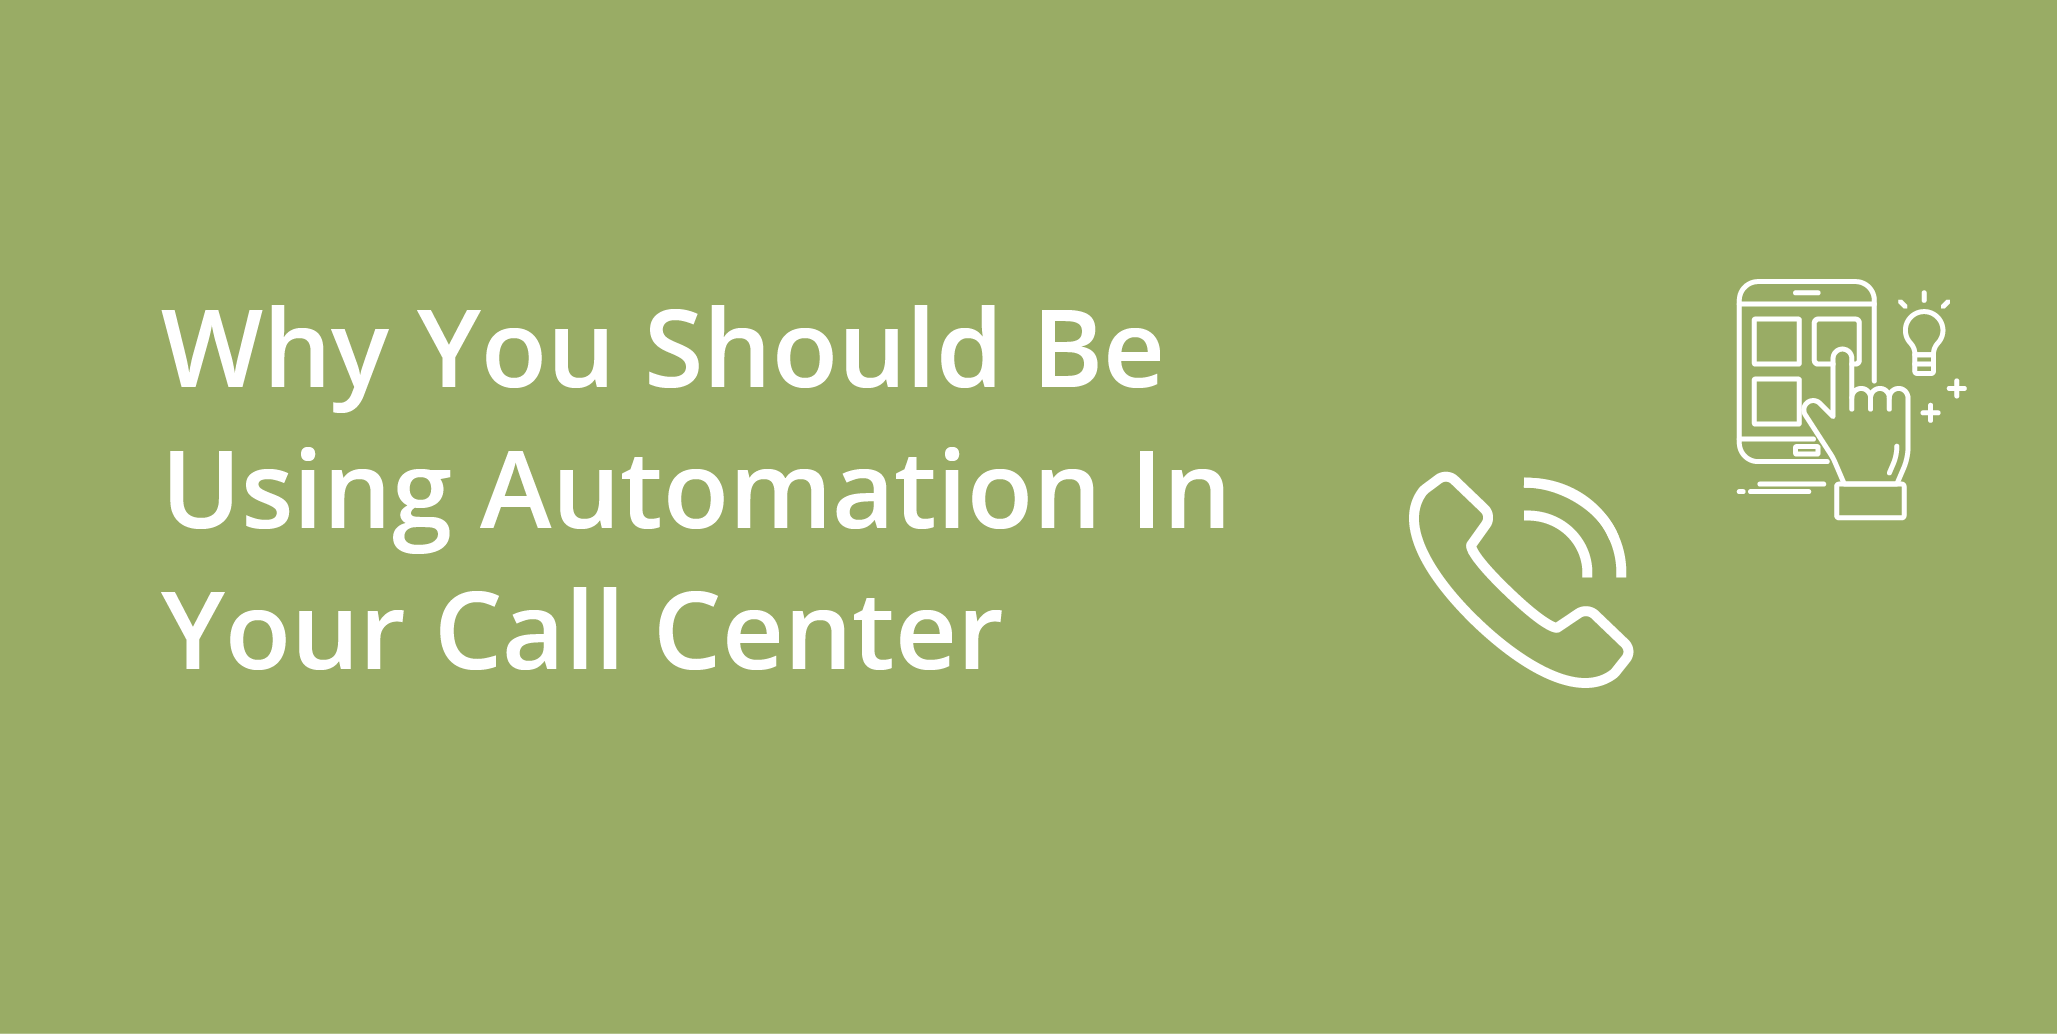 Why You Should Be Using Automation In Your Call Center | Telephones for business